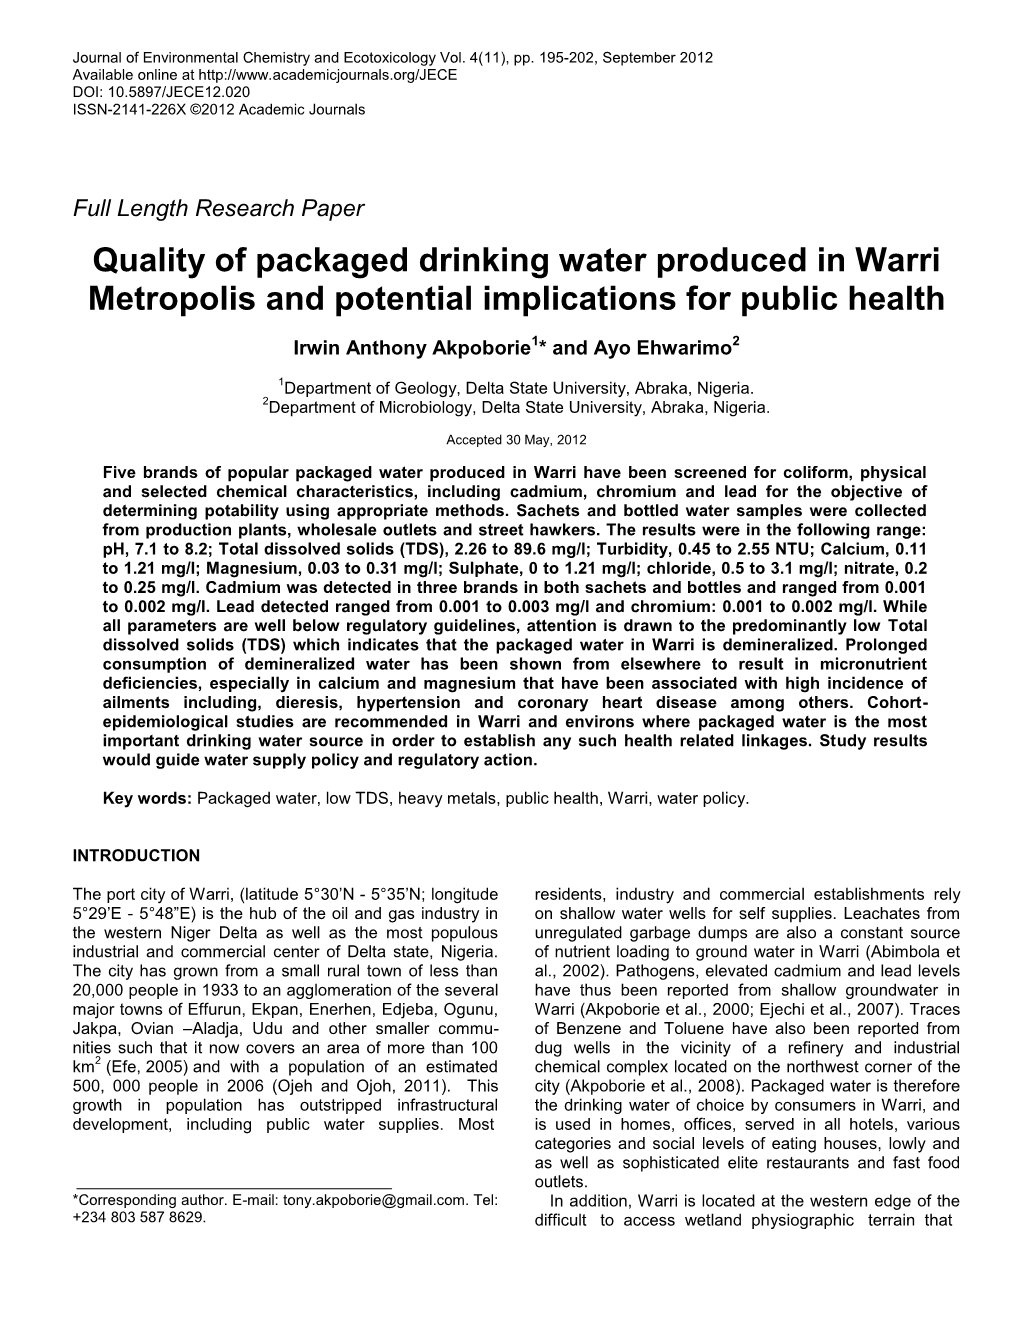 Quality of Packaged Drinking Water Produced in Warri Metropolis and Potential Implications for Public Health